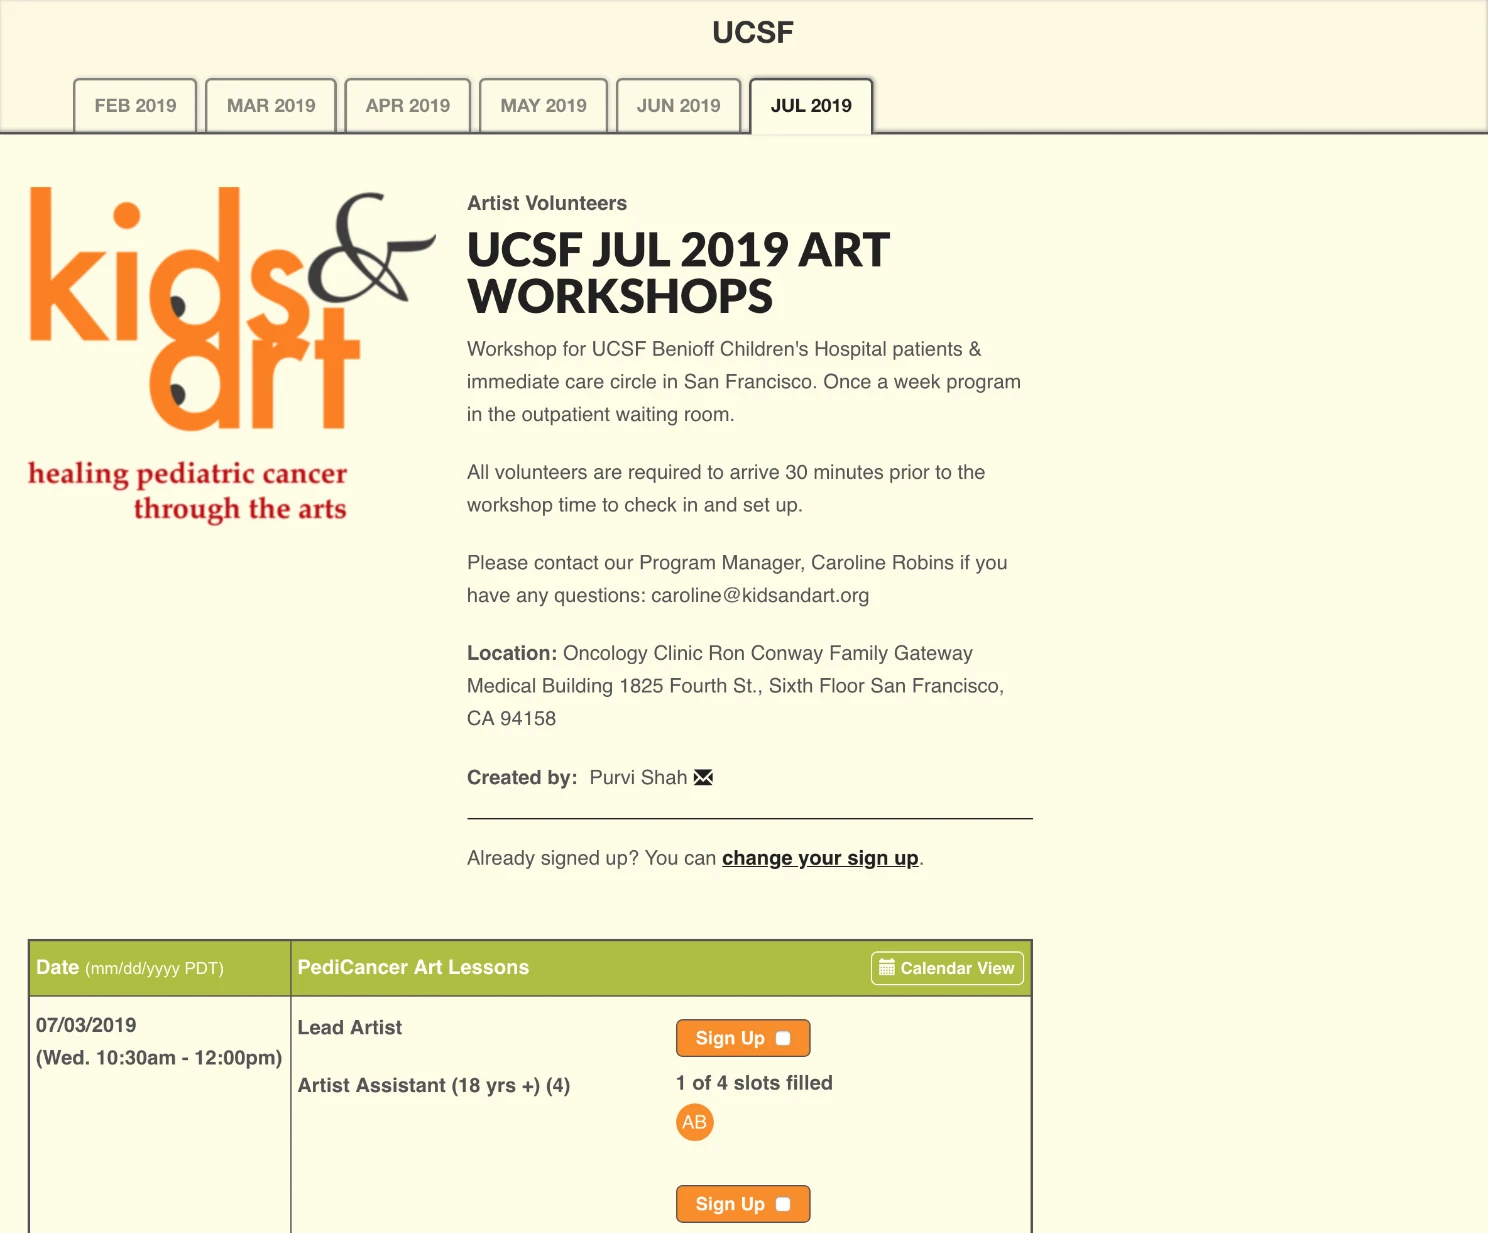 Sample Signup Genius page for a workshop at UCSF.